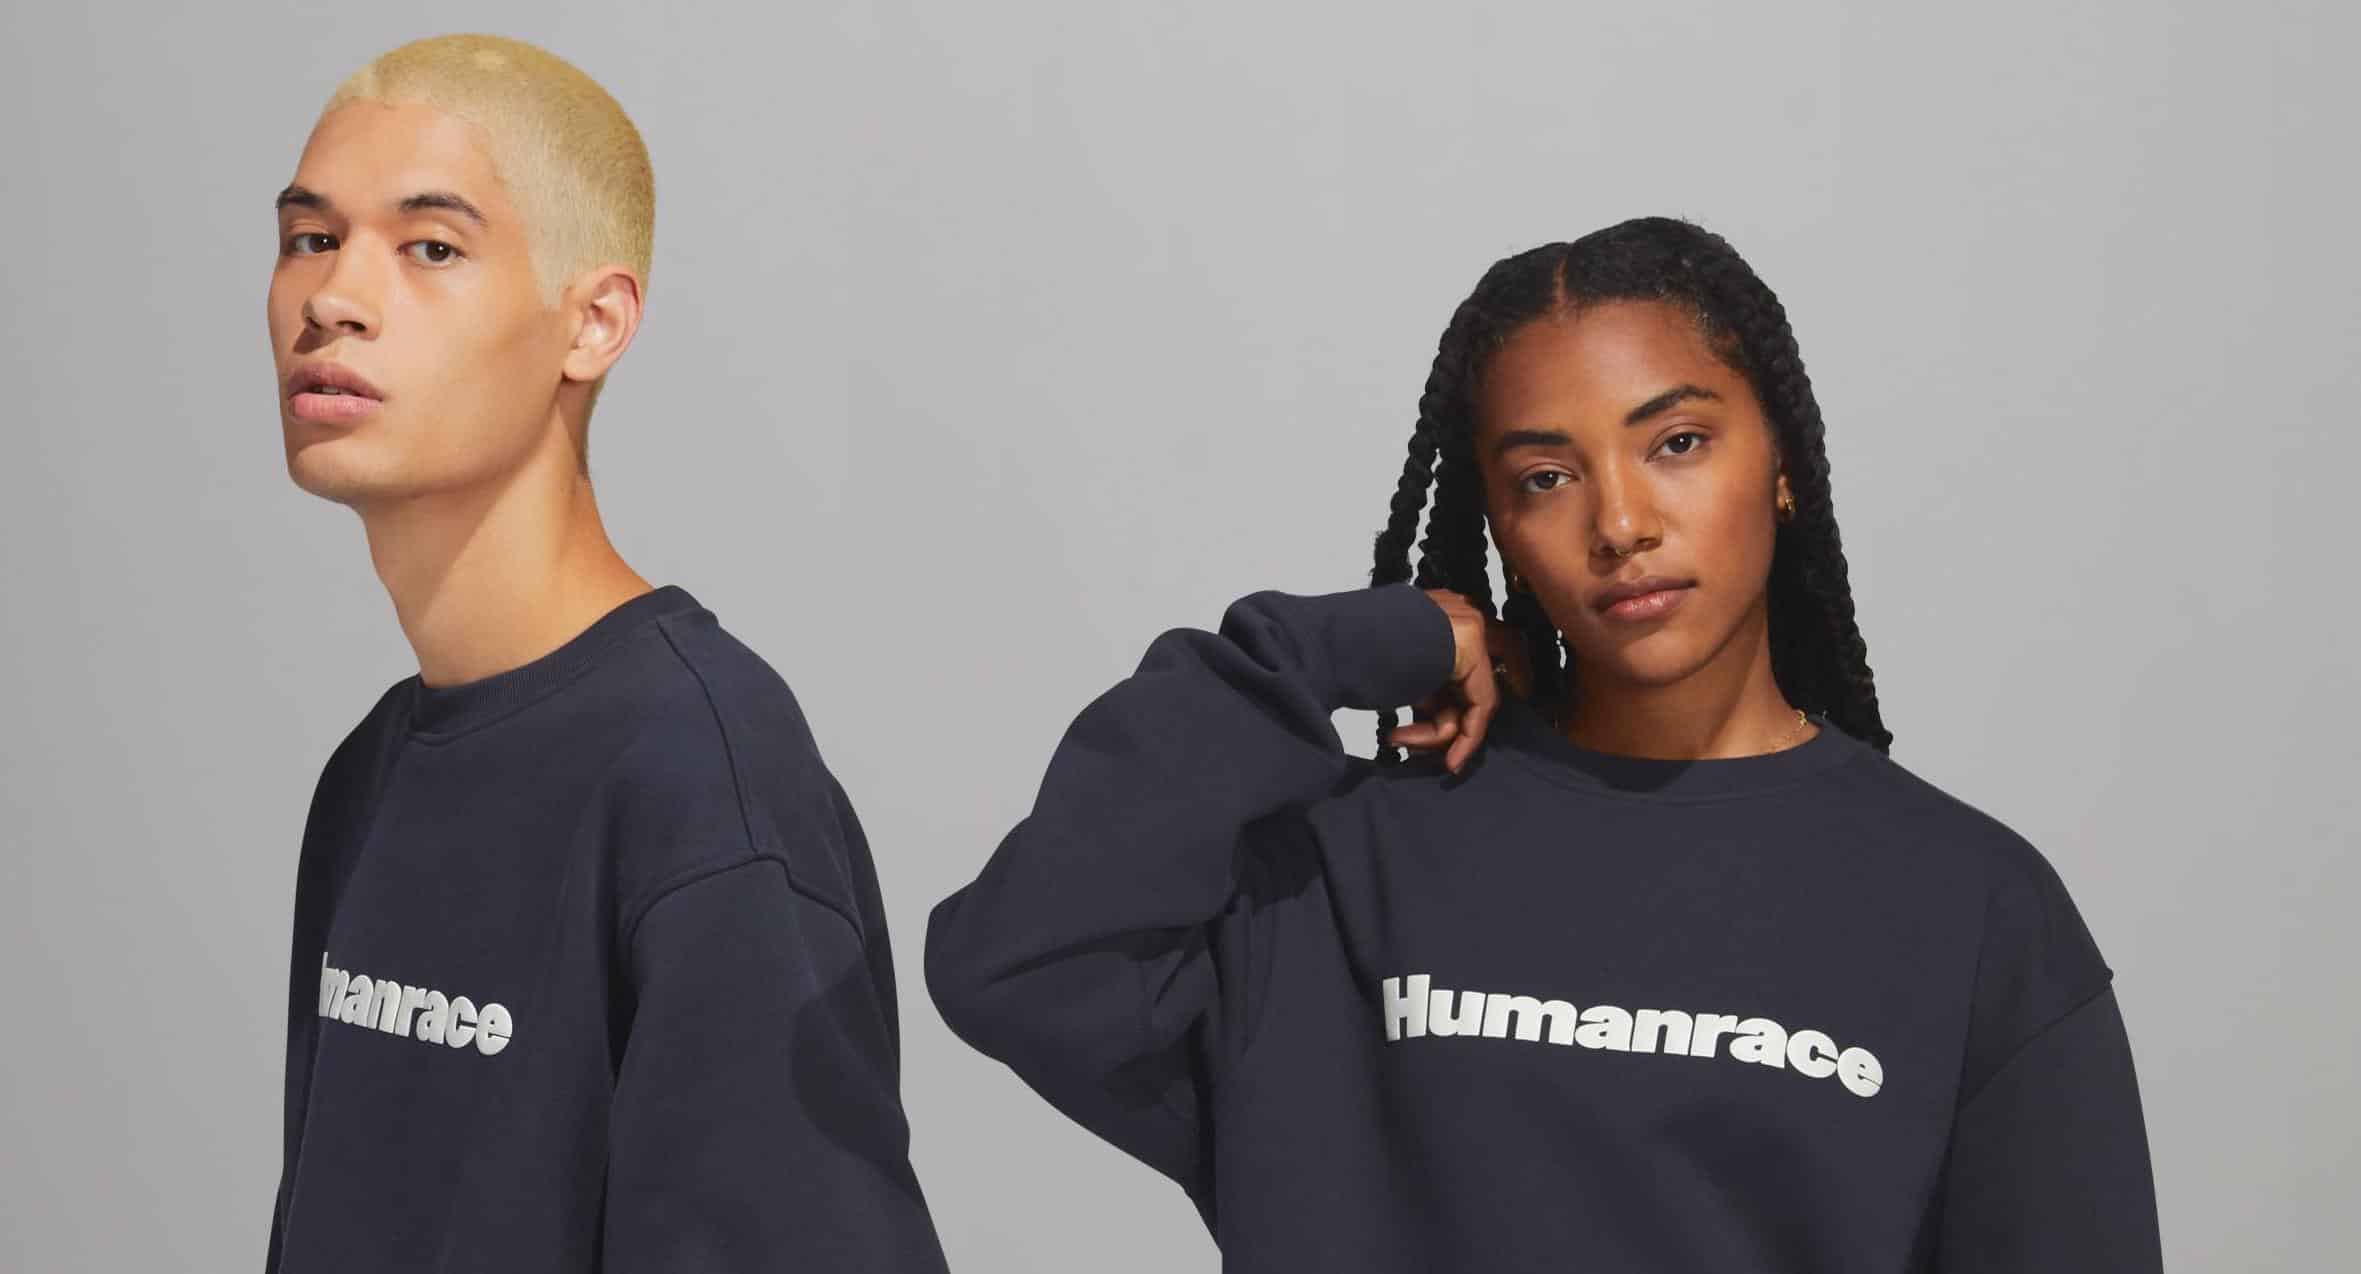 Adidas originals and pharrell williams drop new fall colourways of their premium basics collection